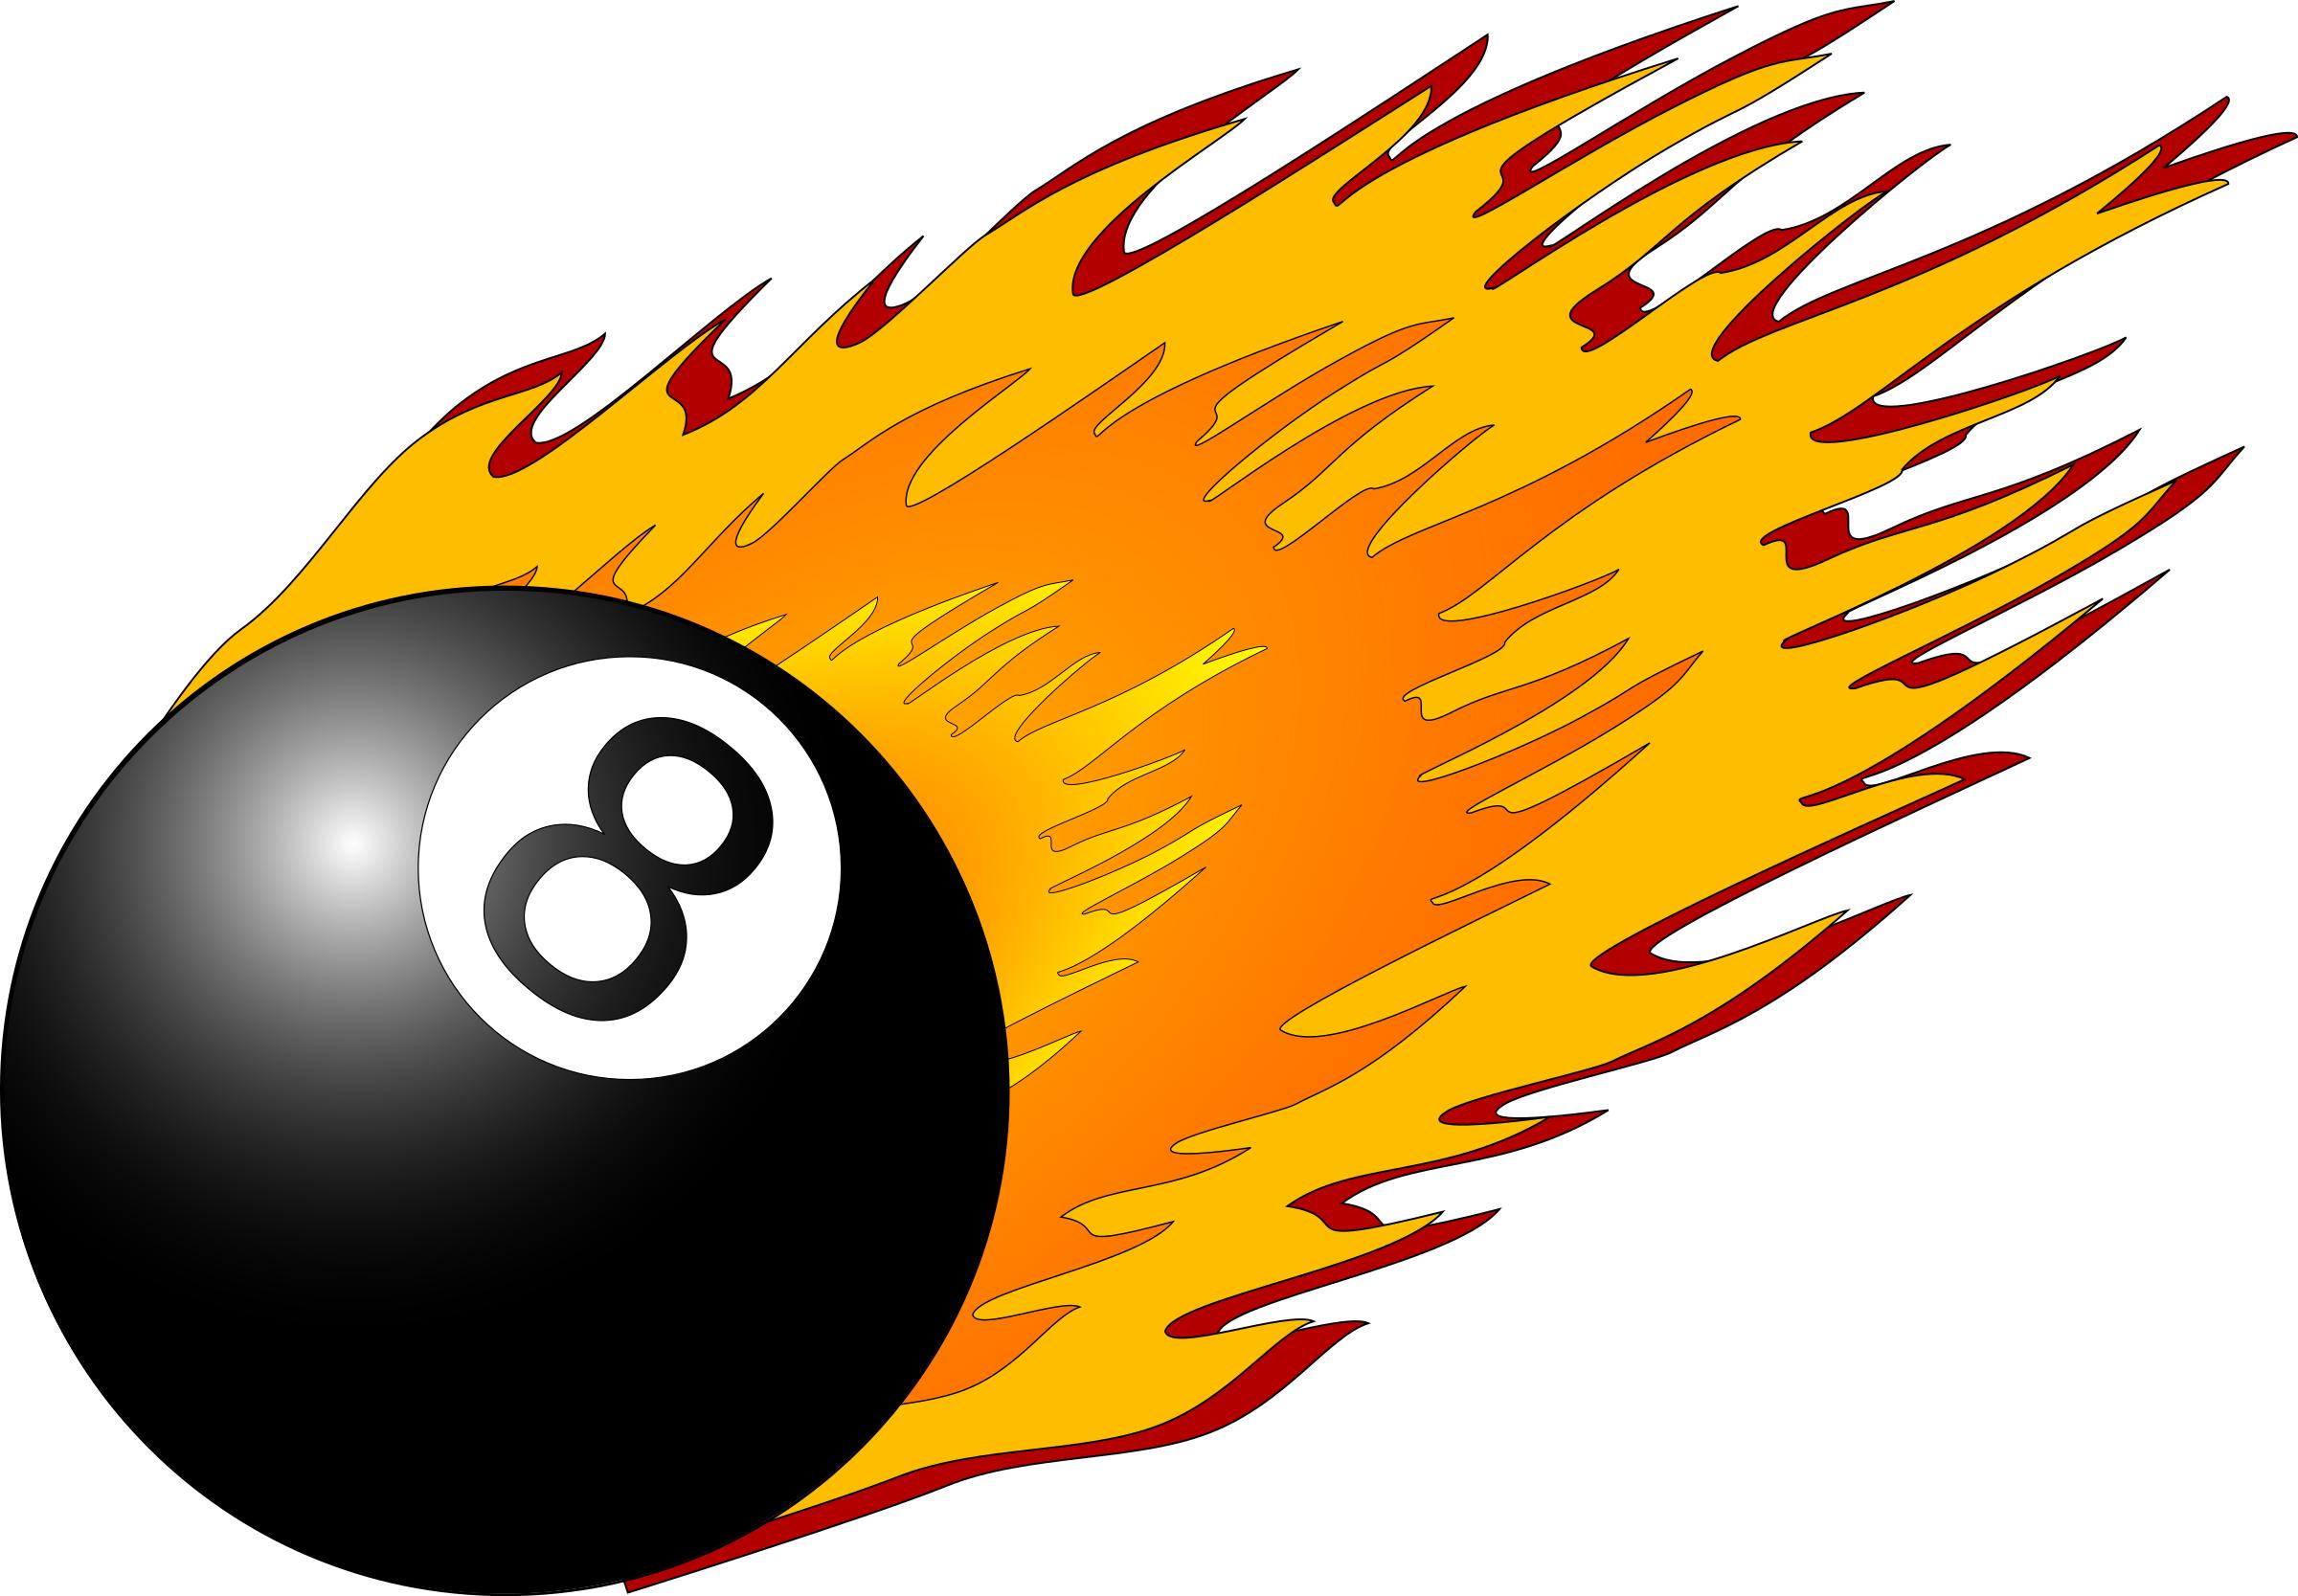 8ball with flames png